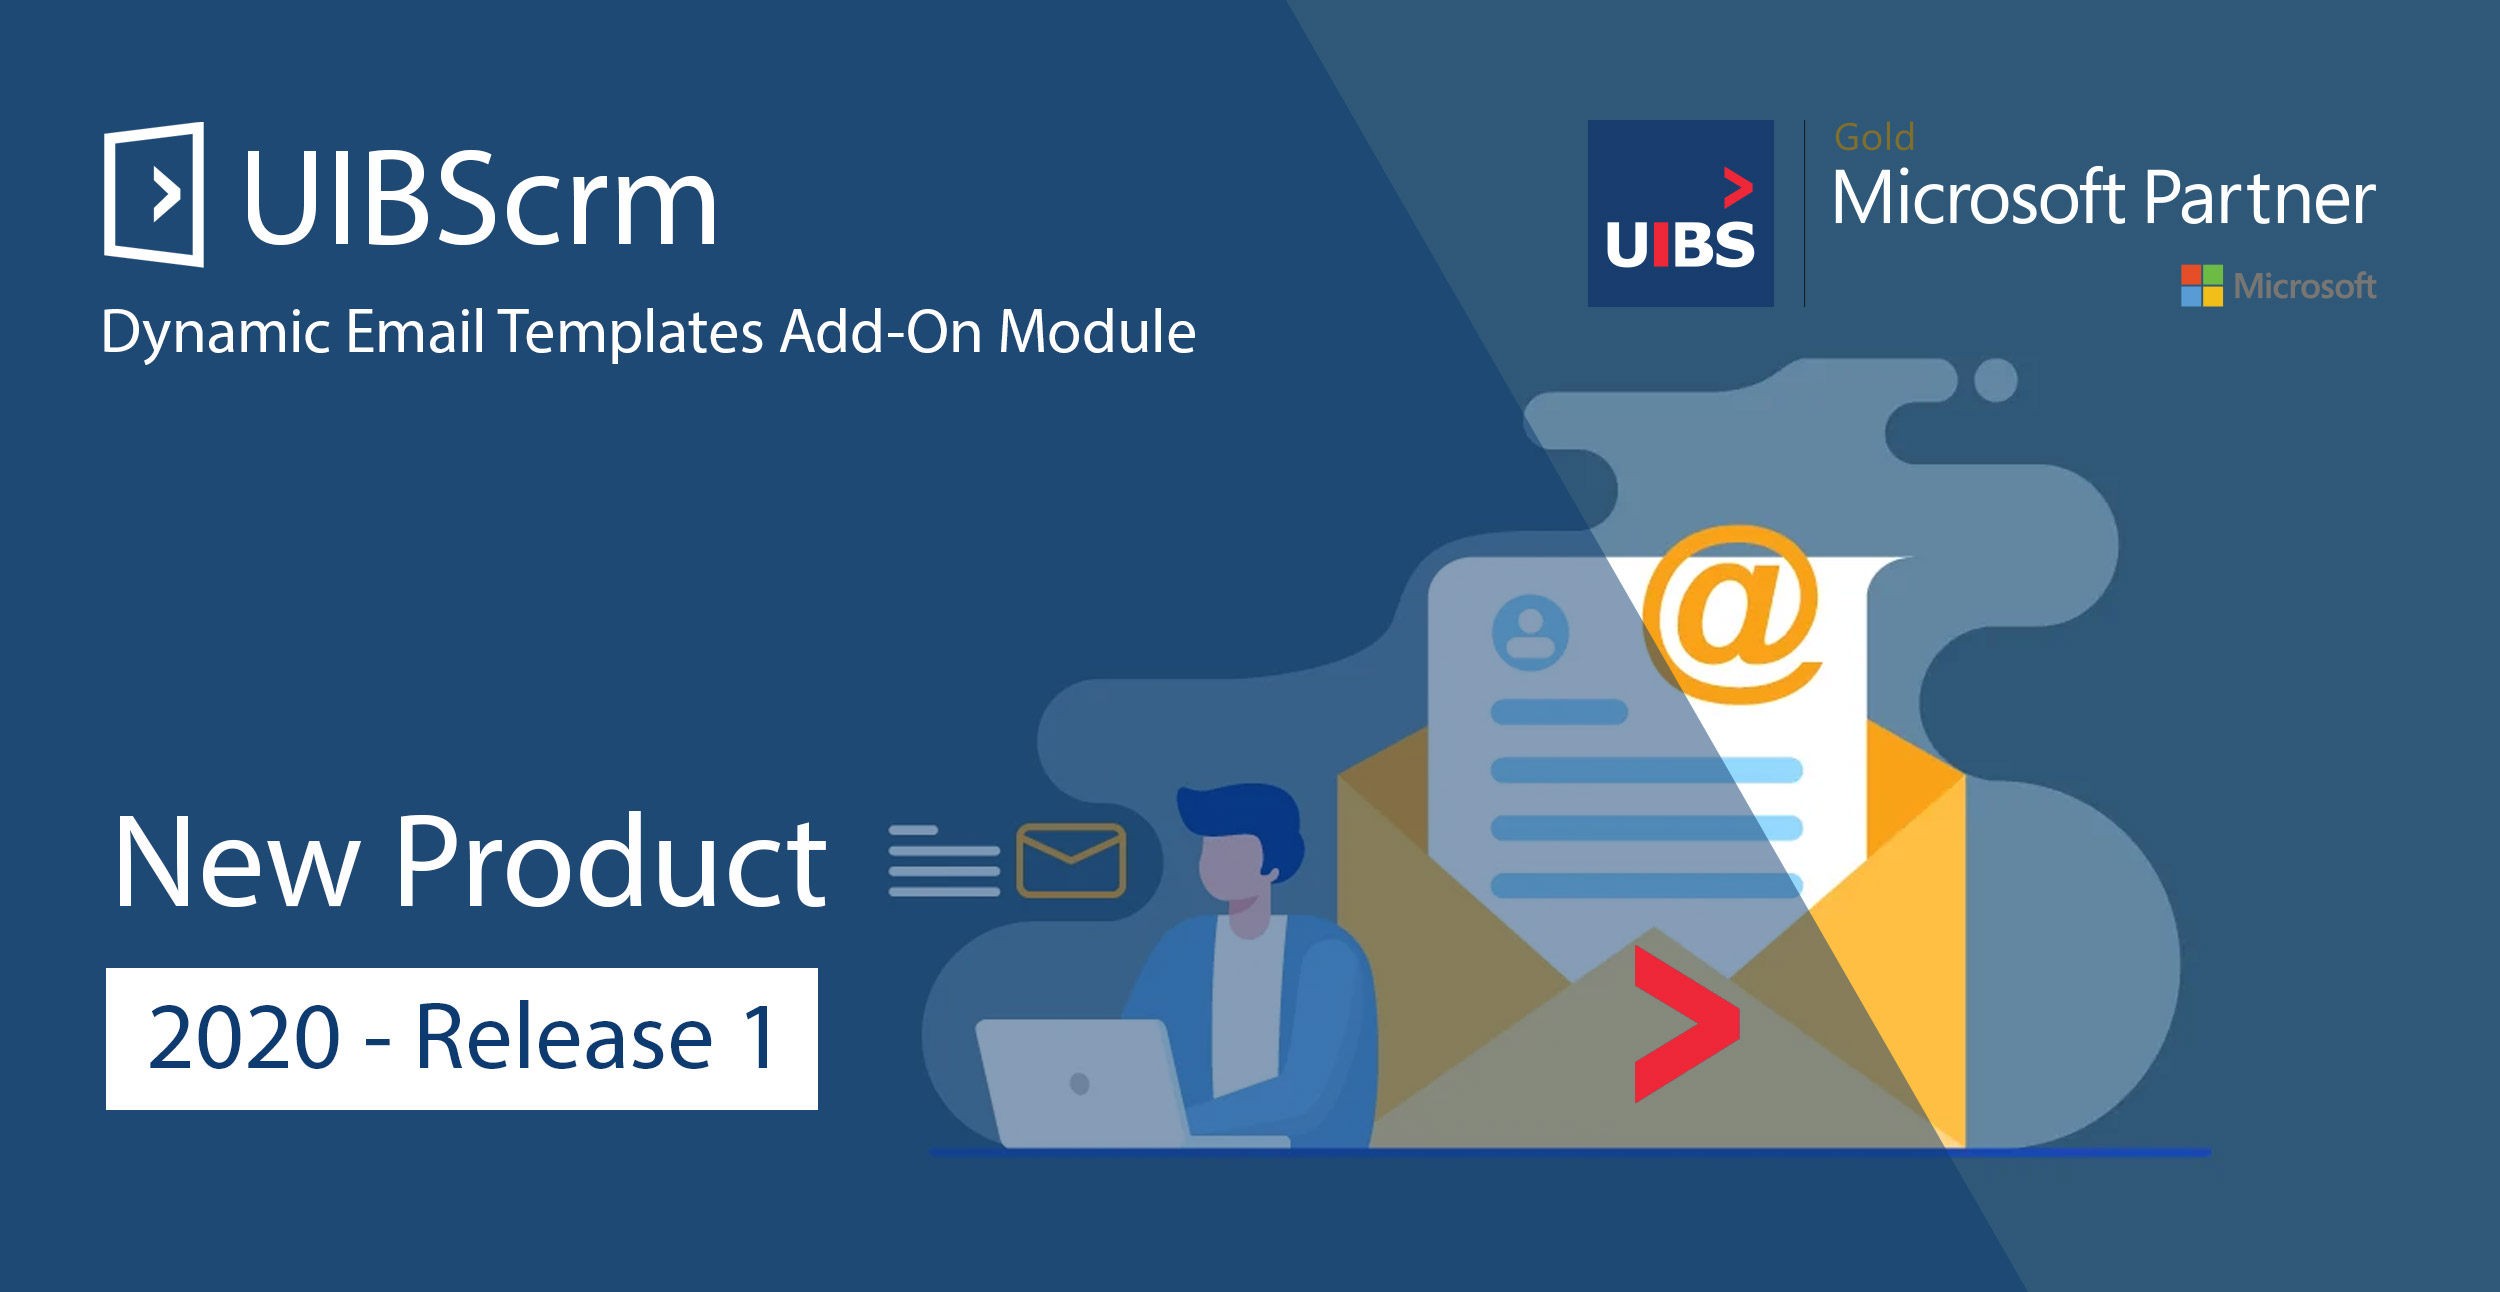 Introducing UIBScrm dynamic email templates add-on